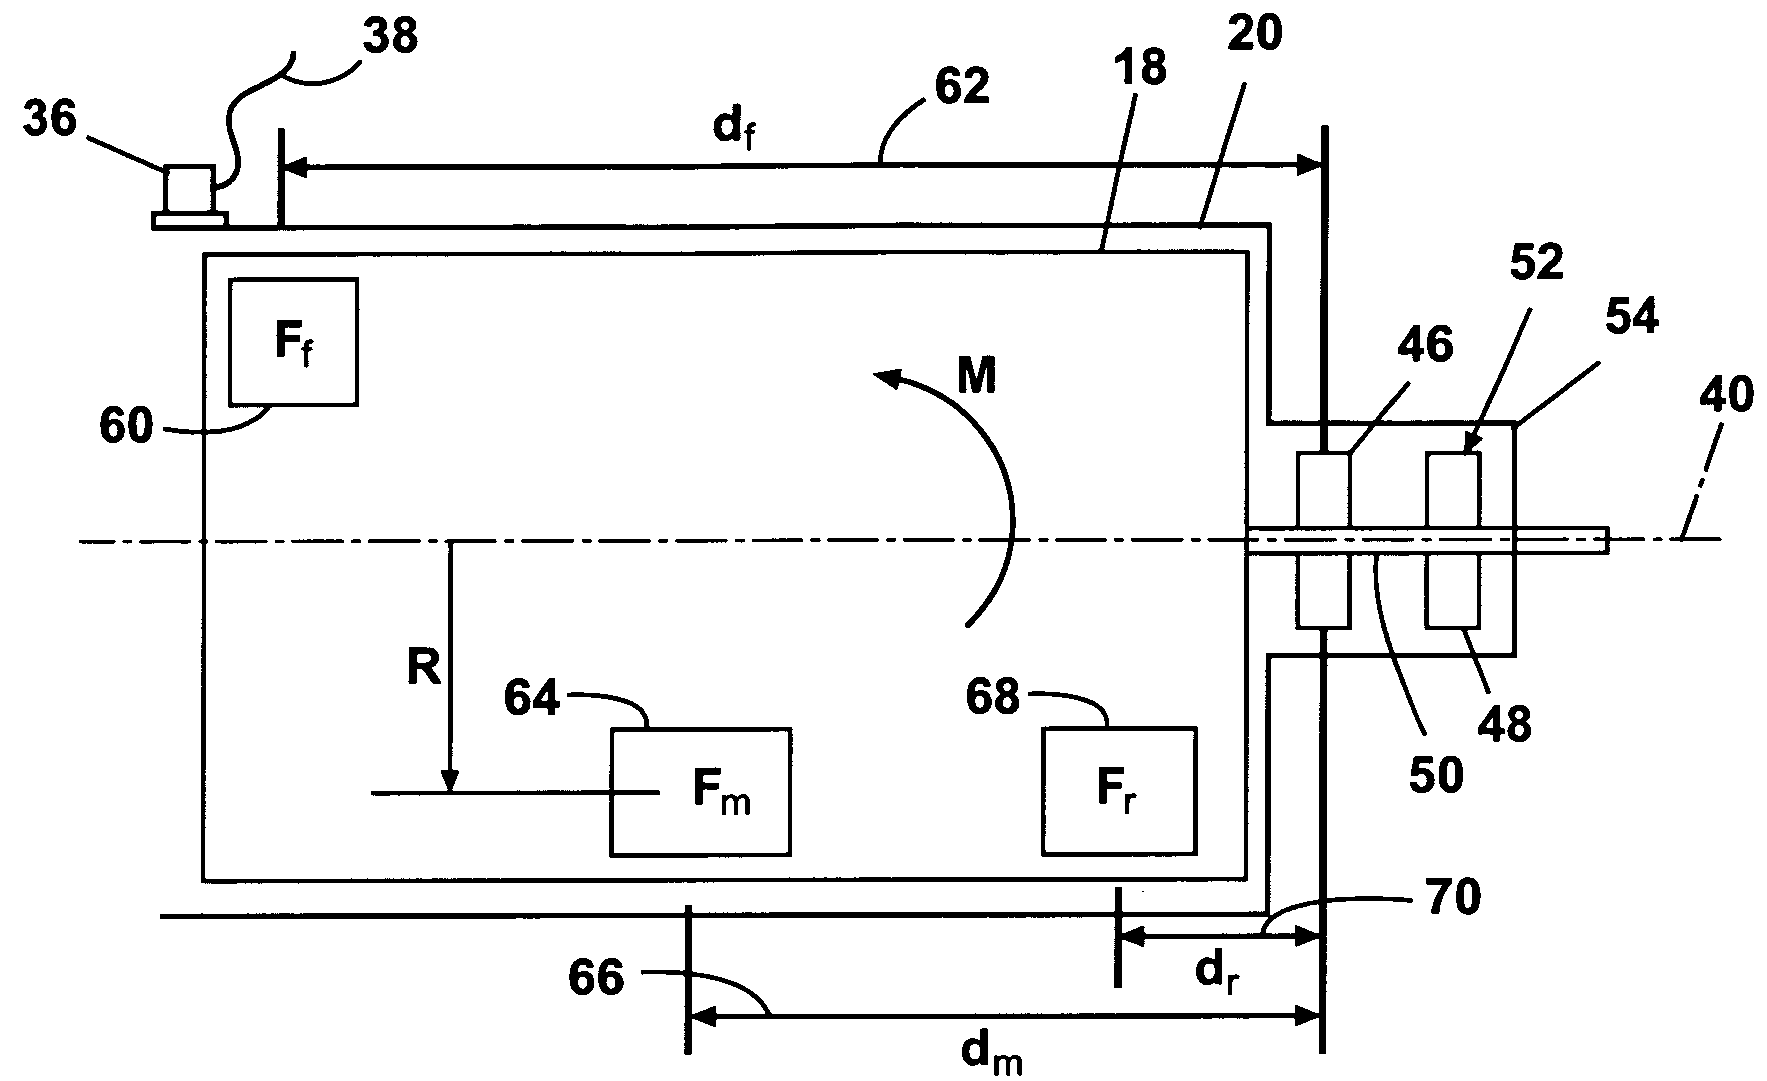 Dynamic load detection for a clothes washer